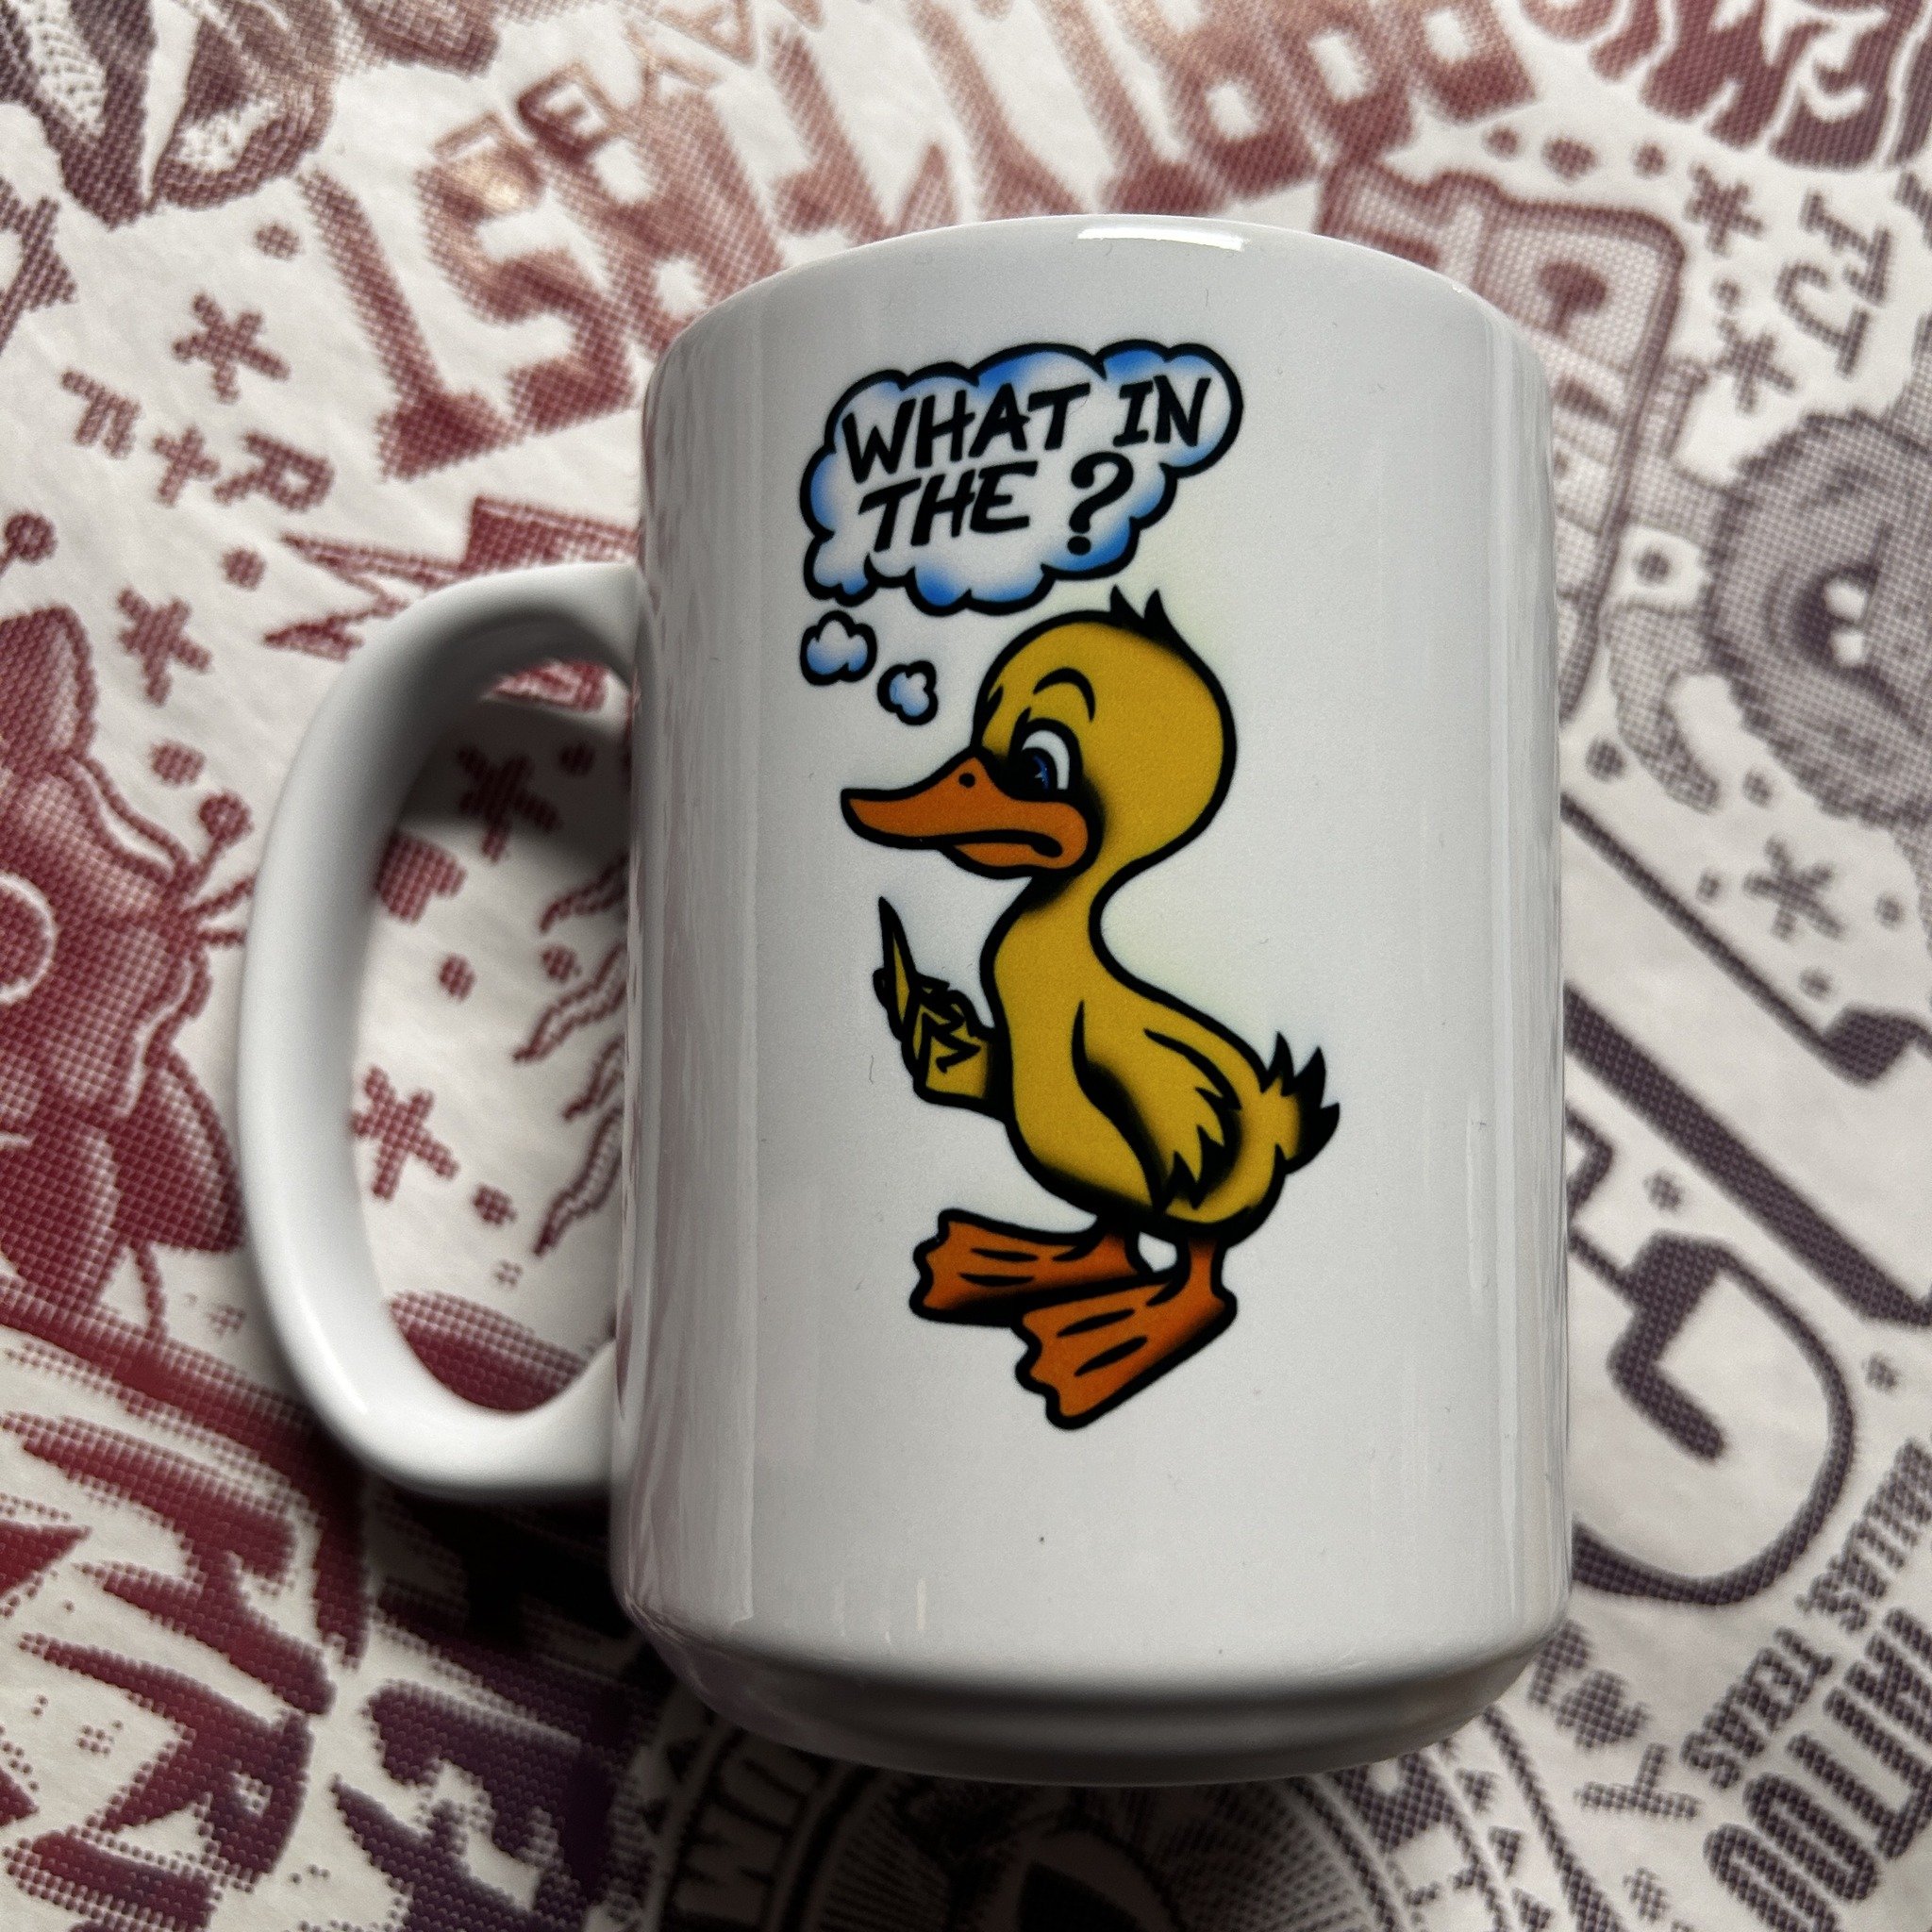 What In The Duck Podcast Coffee Mugs!
🔸FREE SHIPPING IN US (Orders of $35 or more)
🔸Only available online at Anchor Screen Printing(.com)
☕Link to store in profile🦆

#G&Oslash;&Oslash;DT&Iuml;MĘ&Scaron; #whatintheduckpodcast #WITD #whatintheduck #